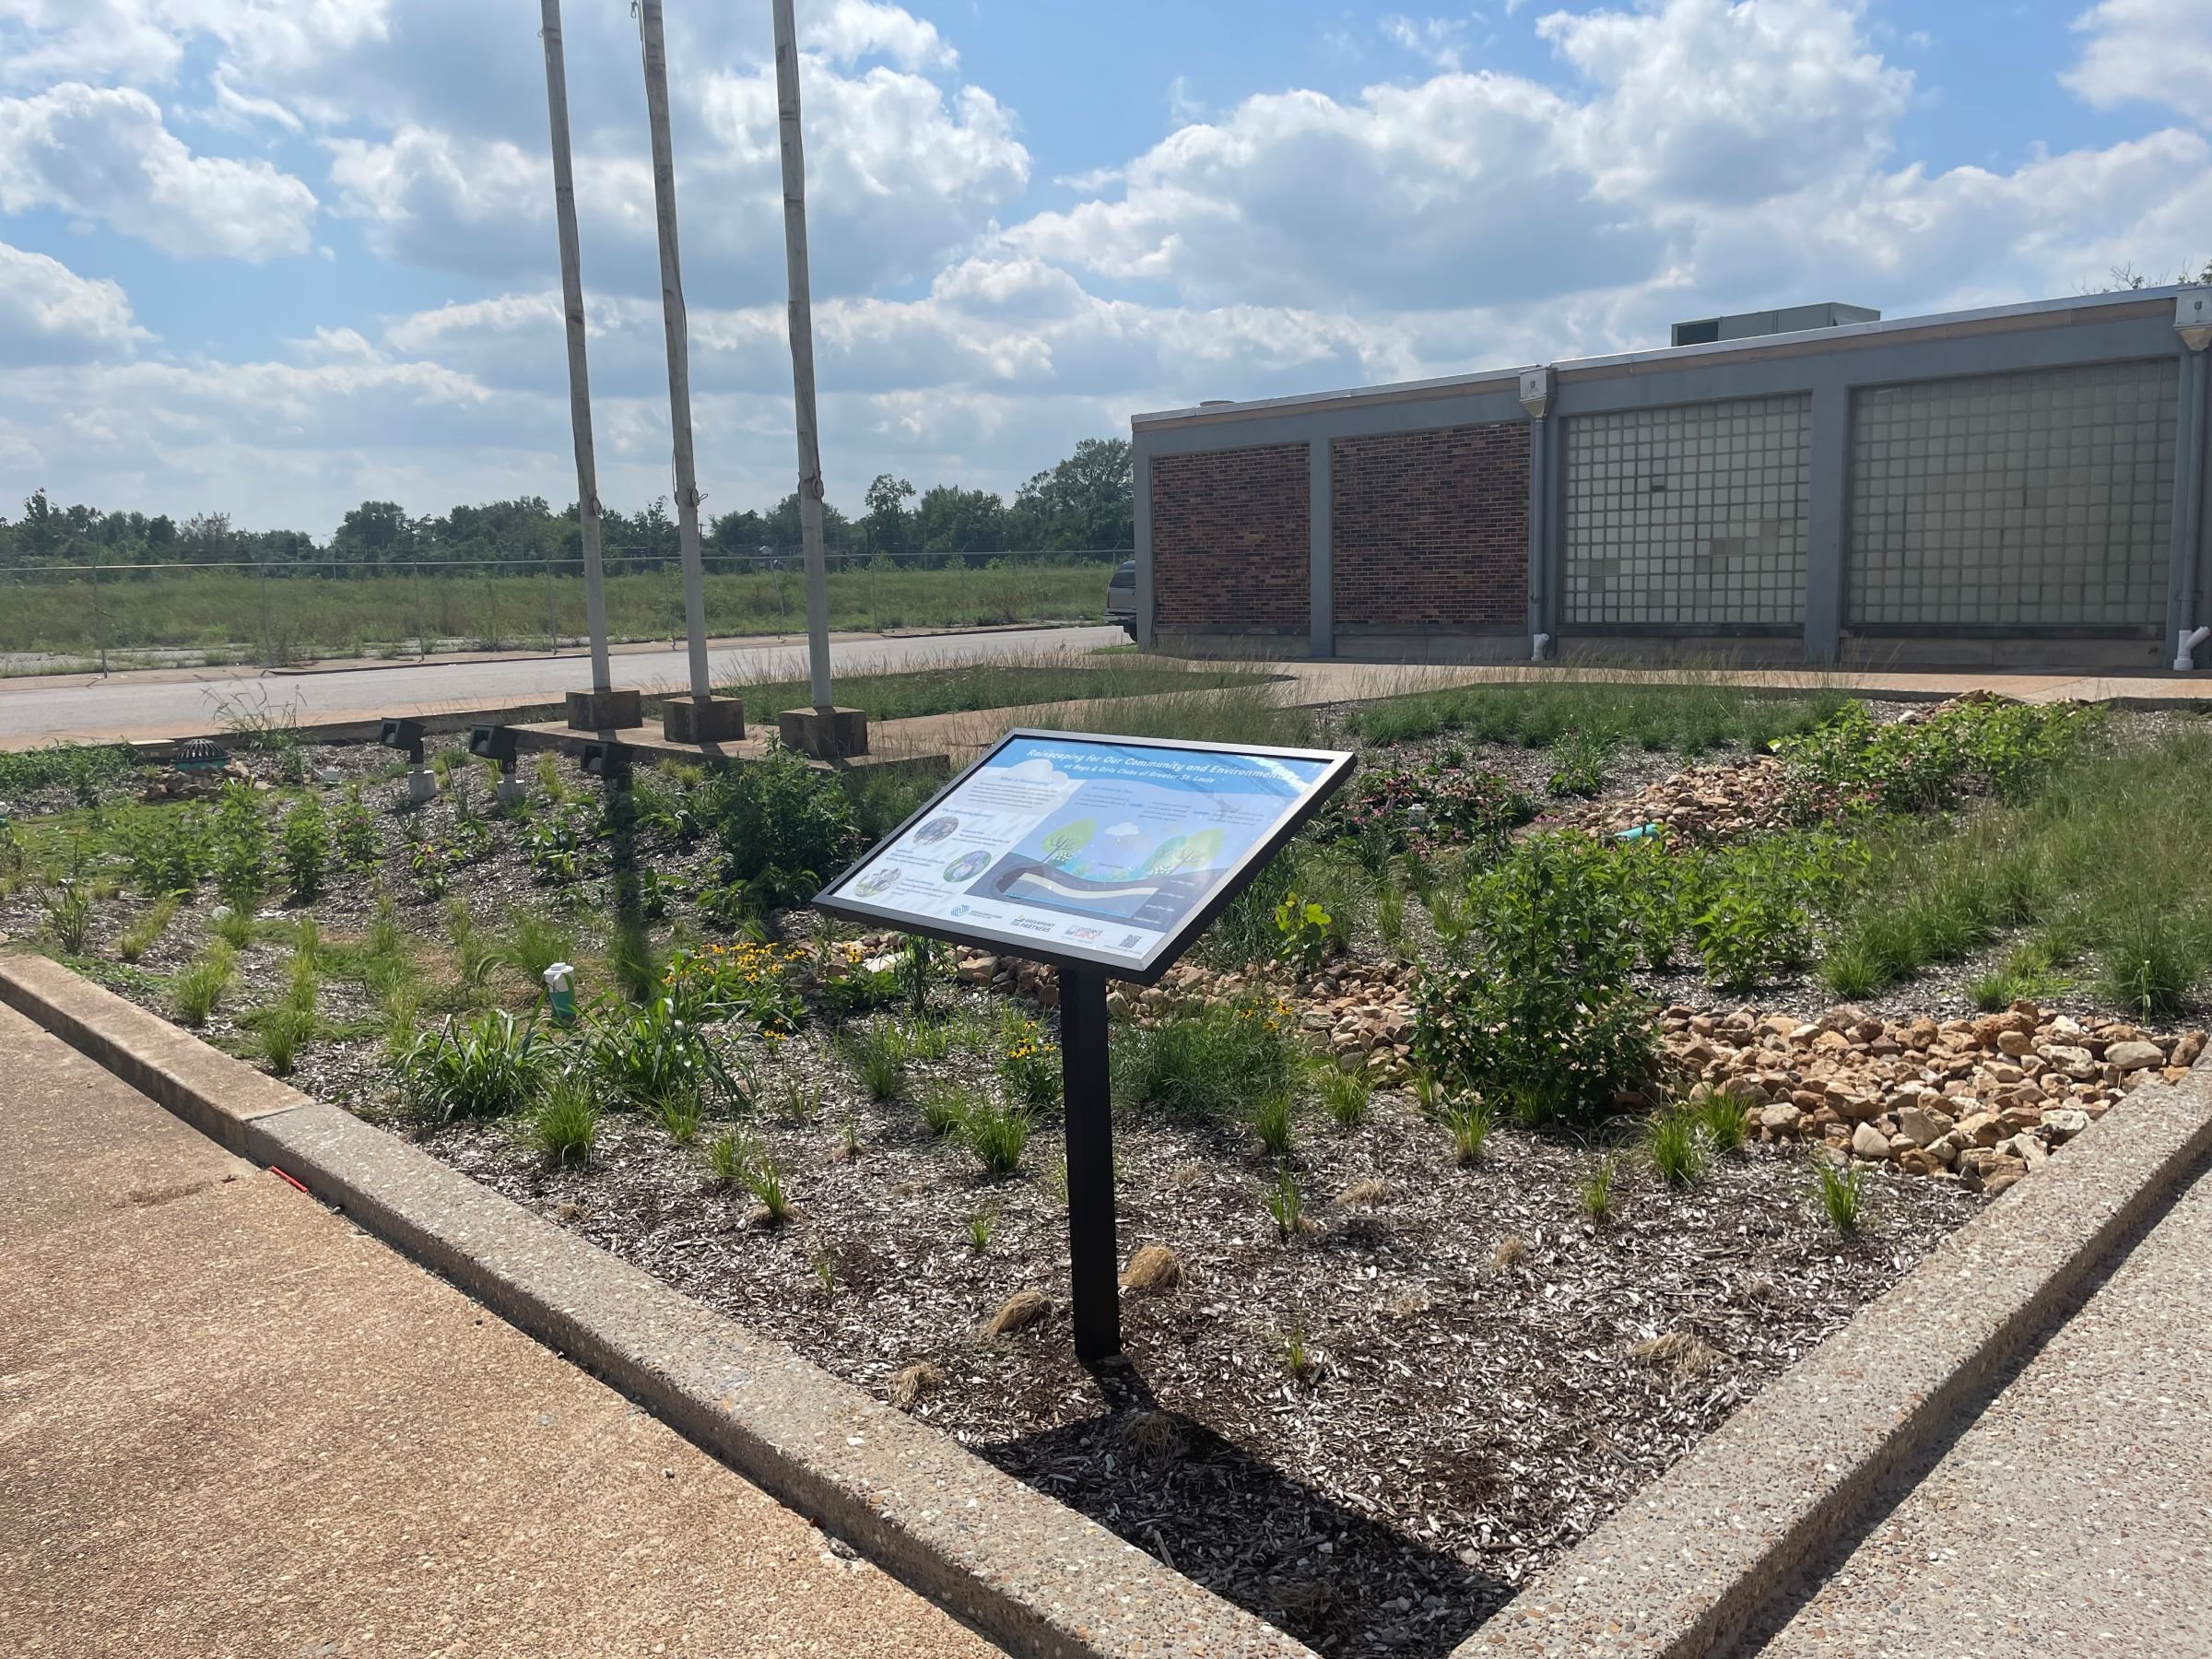 Rain garden and educational sign at the Boys &amp; Girls Club of Greater St. Louis, Herbert Hoover Club